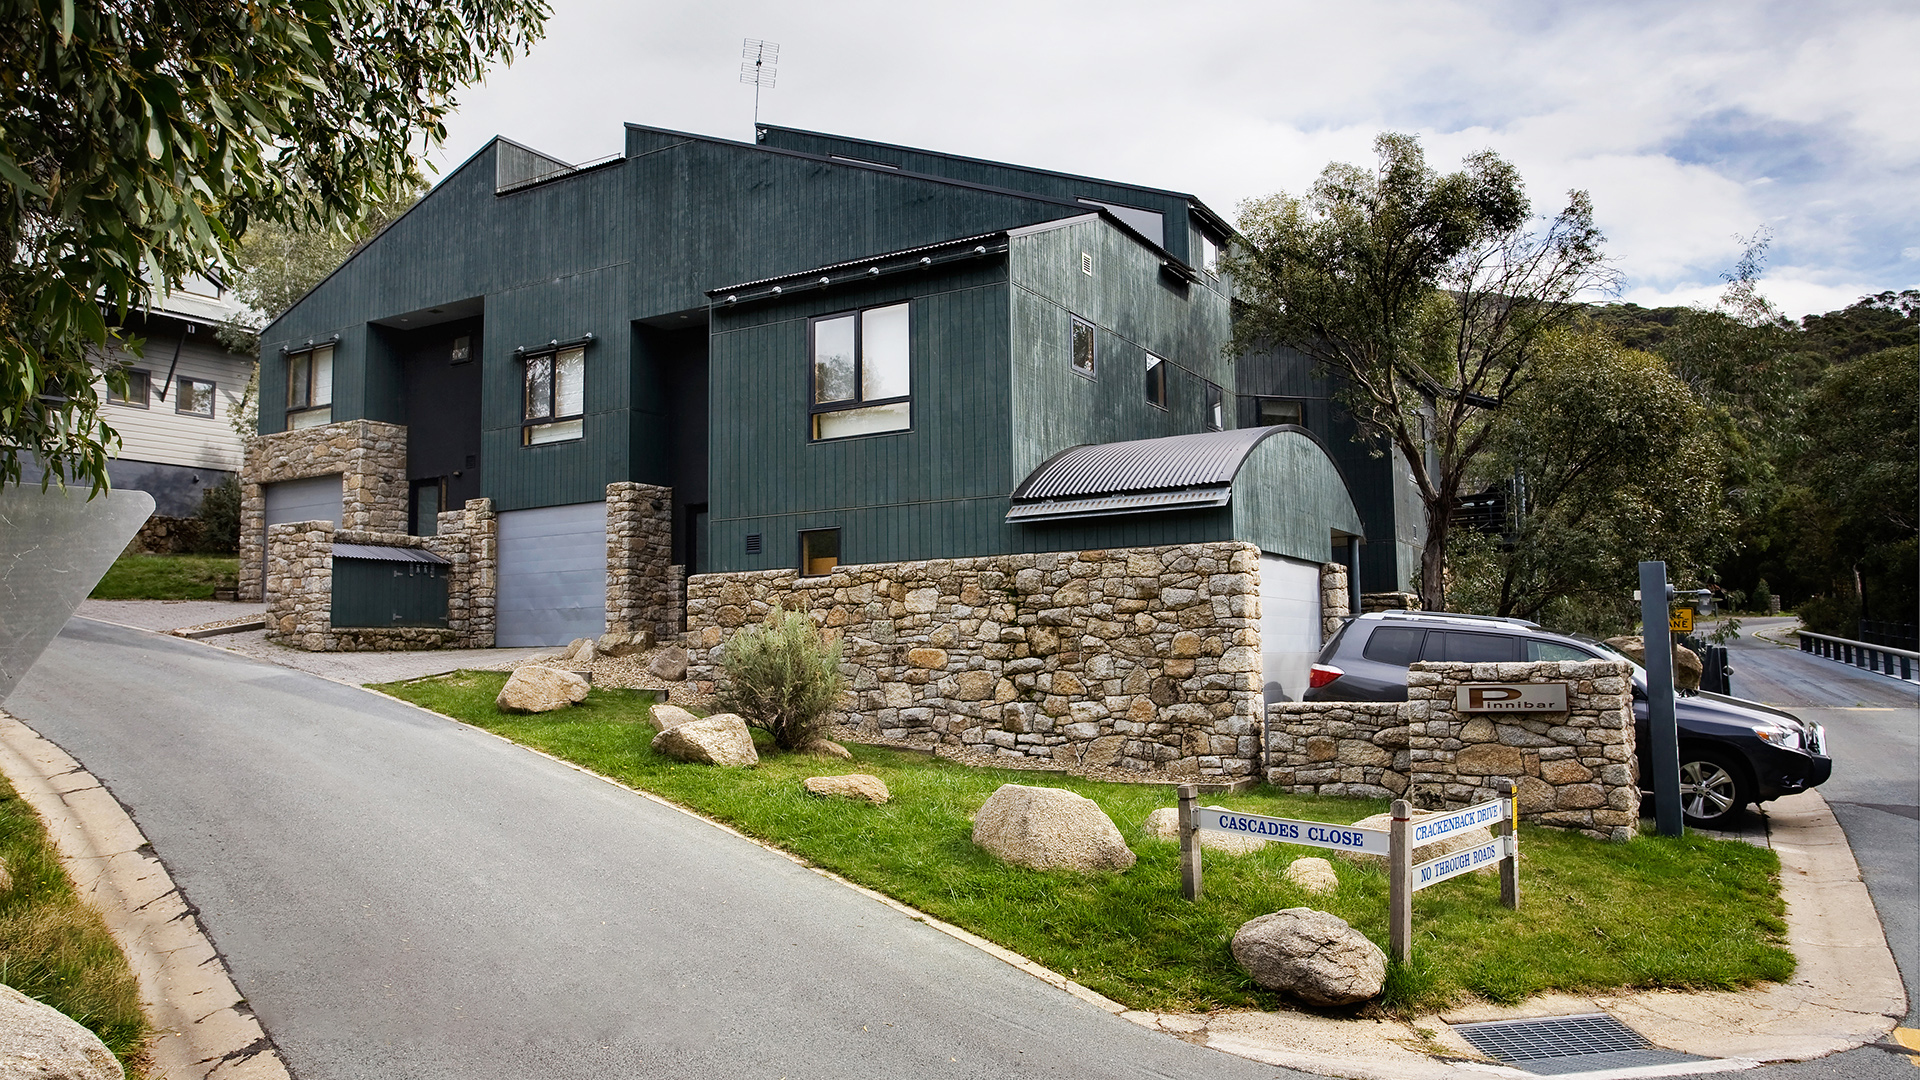 Thredbo, Large Two Bedroom and Loft Ski Chalet in Small Complex of Three Overlooking Ramshead Creek – Price: $1,900,000- $1,980,000